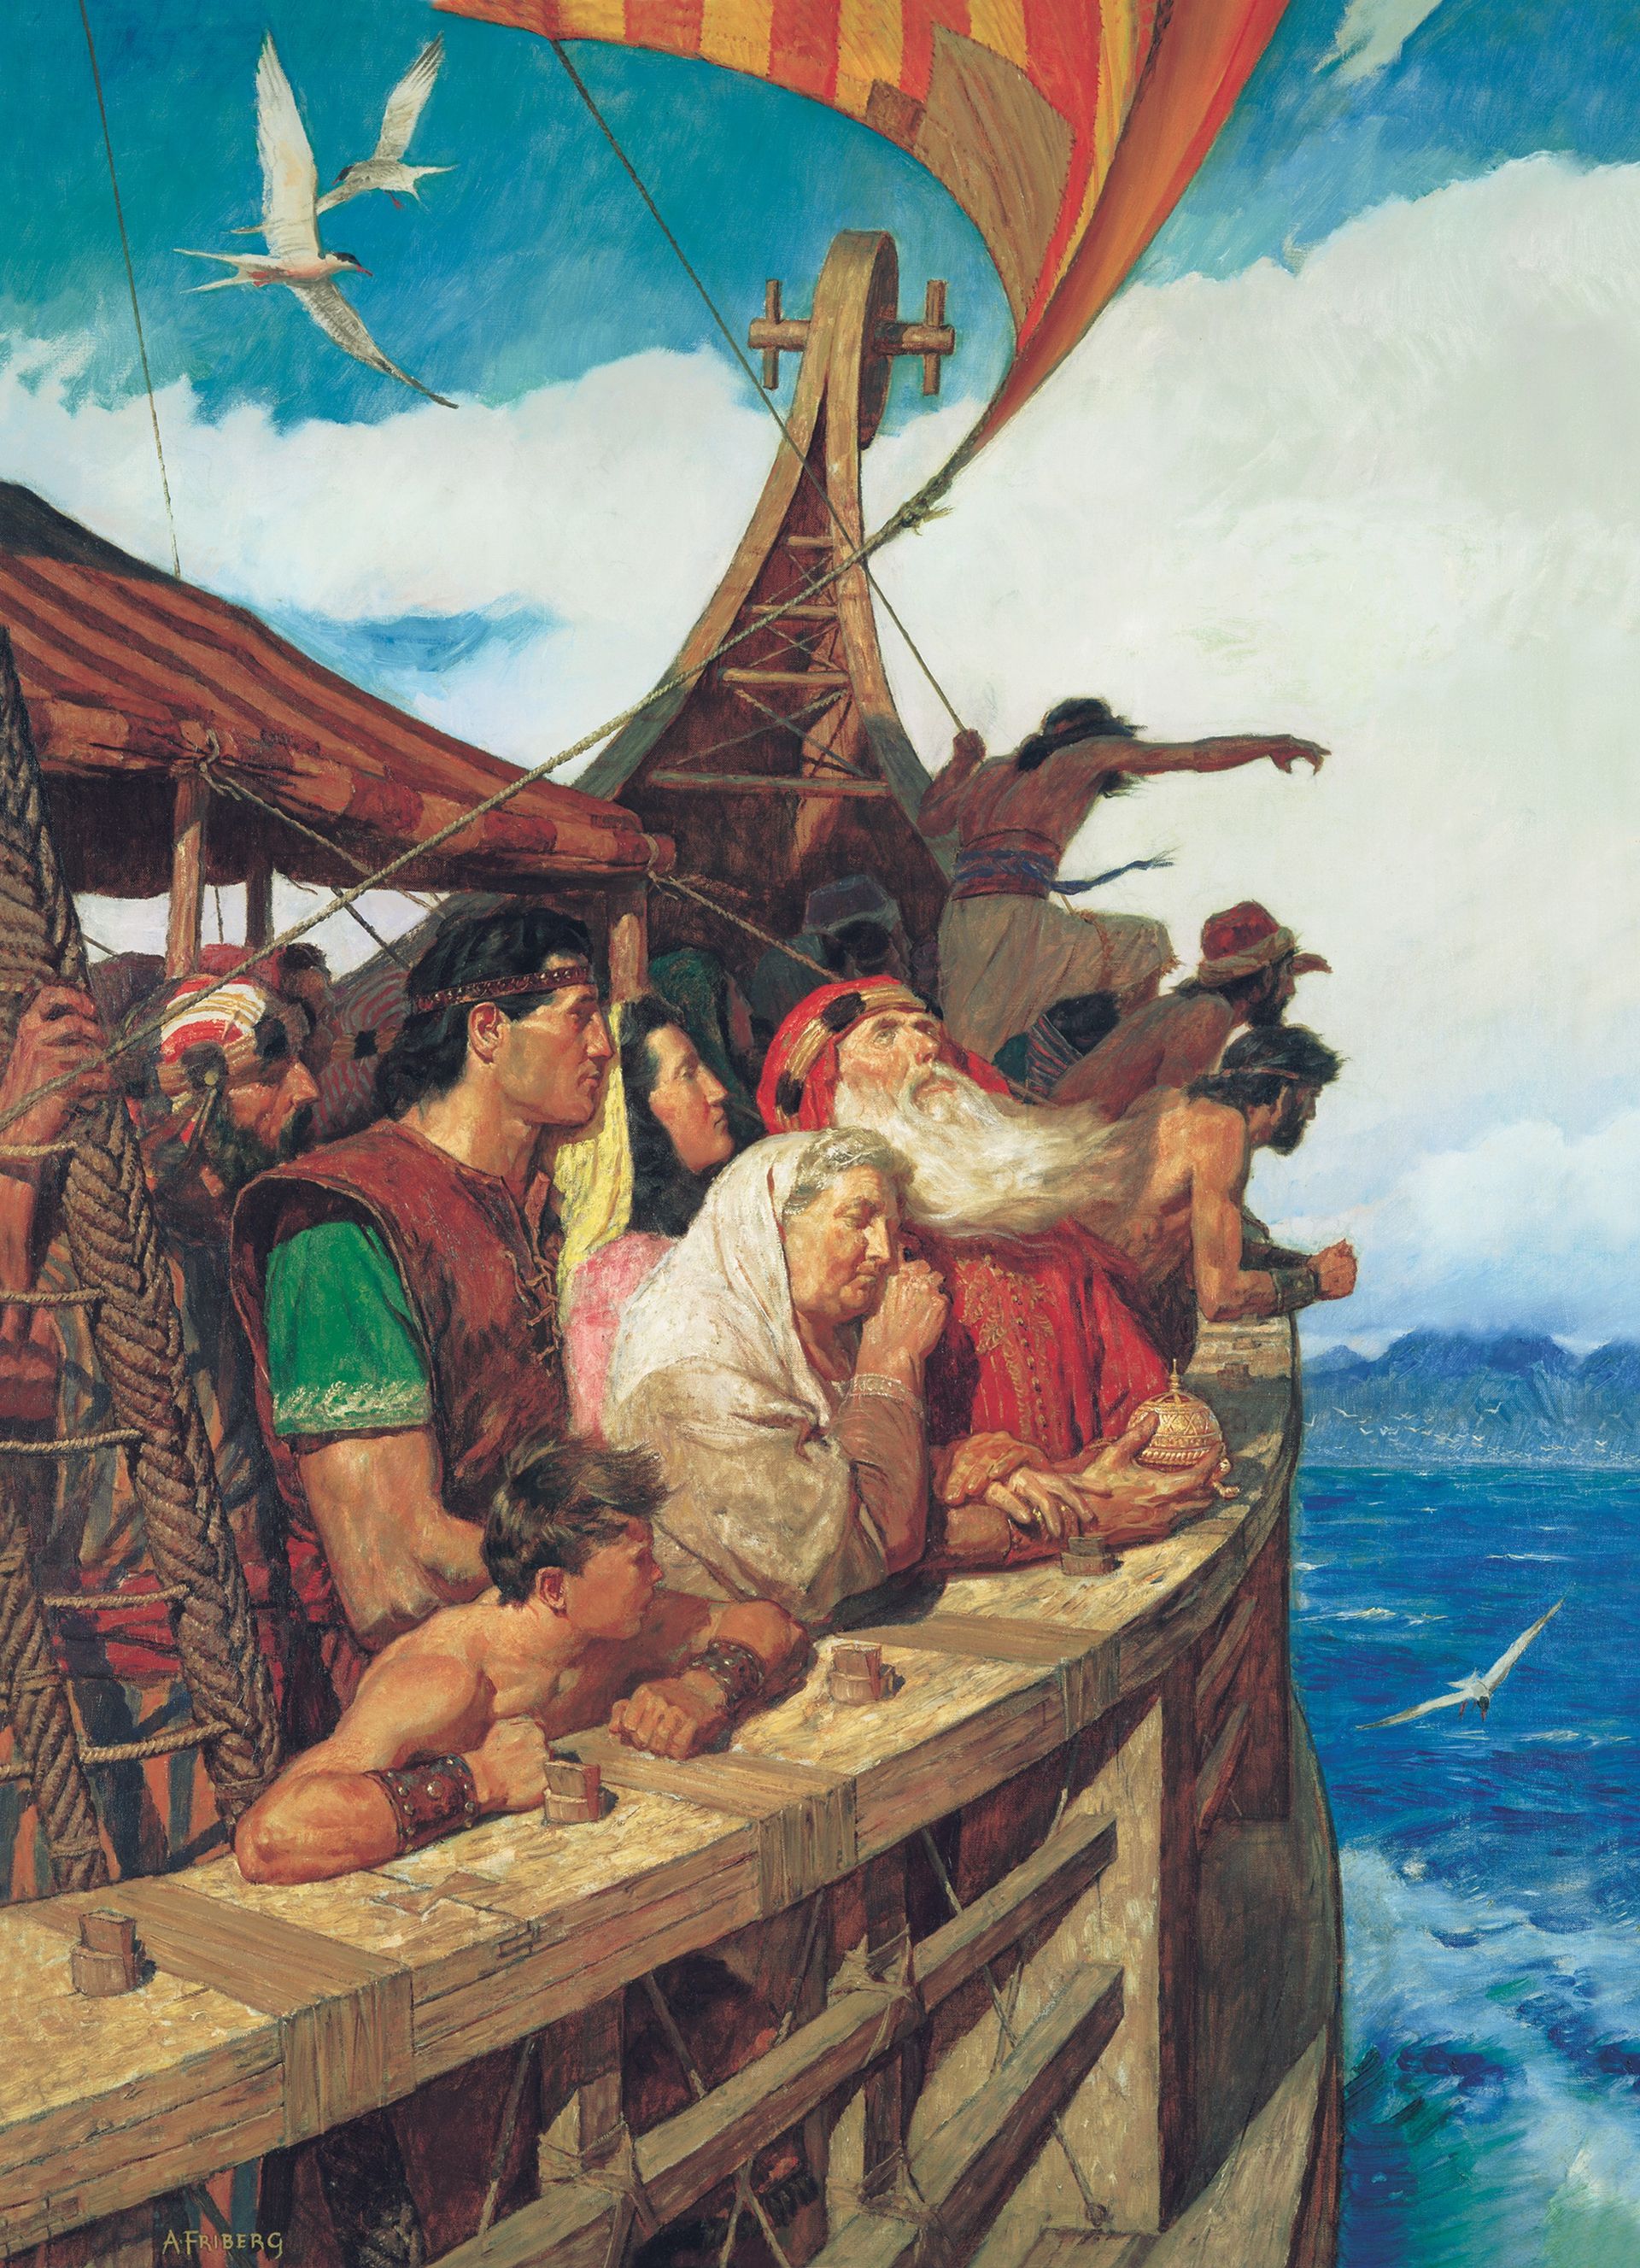 Lehi and His People Arrive in the Promised Land, by Arnold Friberg (62045); GAK 304; GAB 71; Primary manual 1-60; Primary manual 3-45; Primary manual 4-20; 1 Nephi 18:1–24